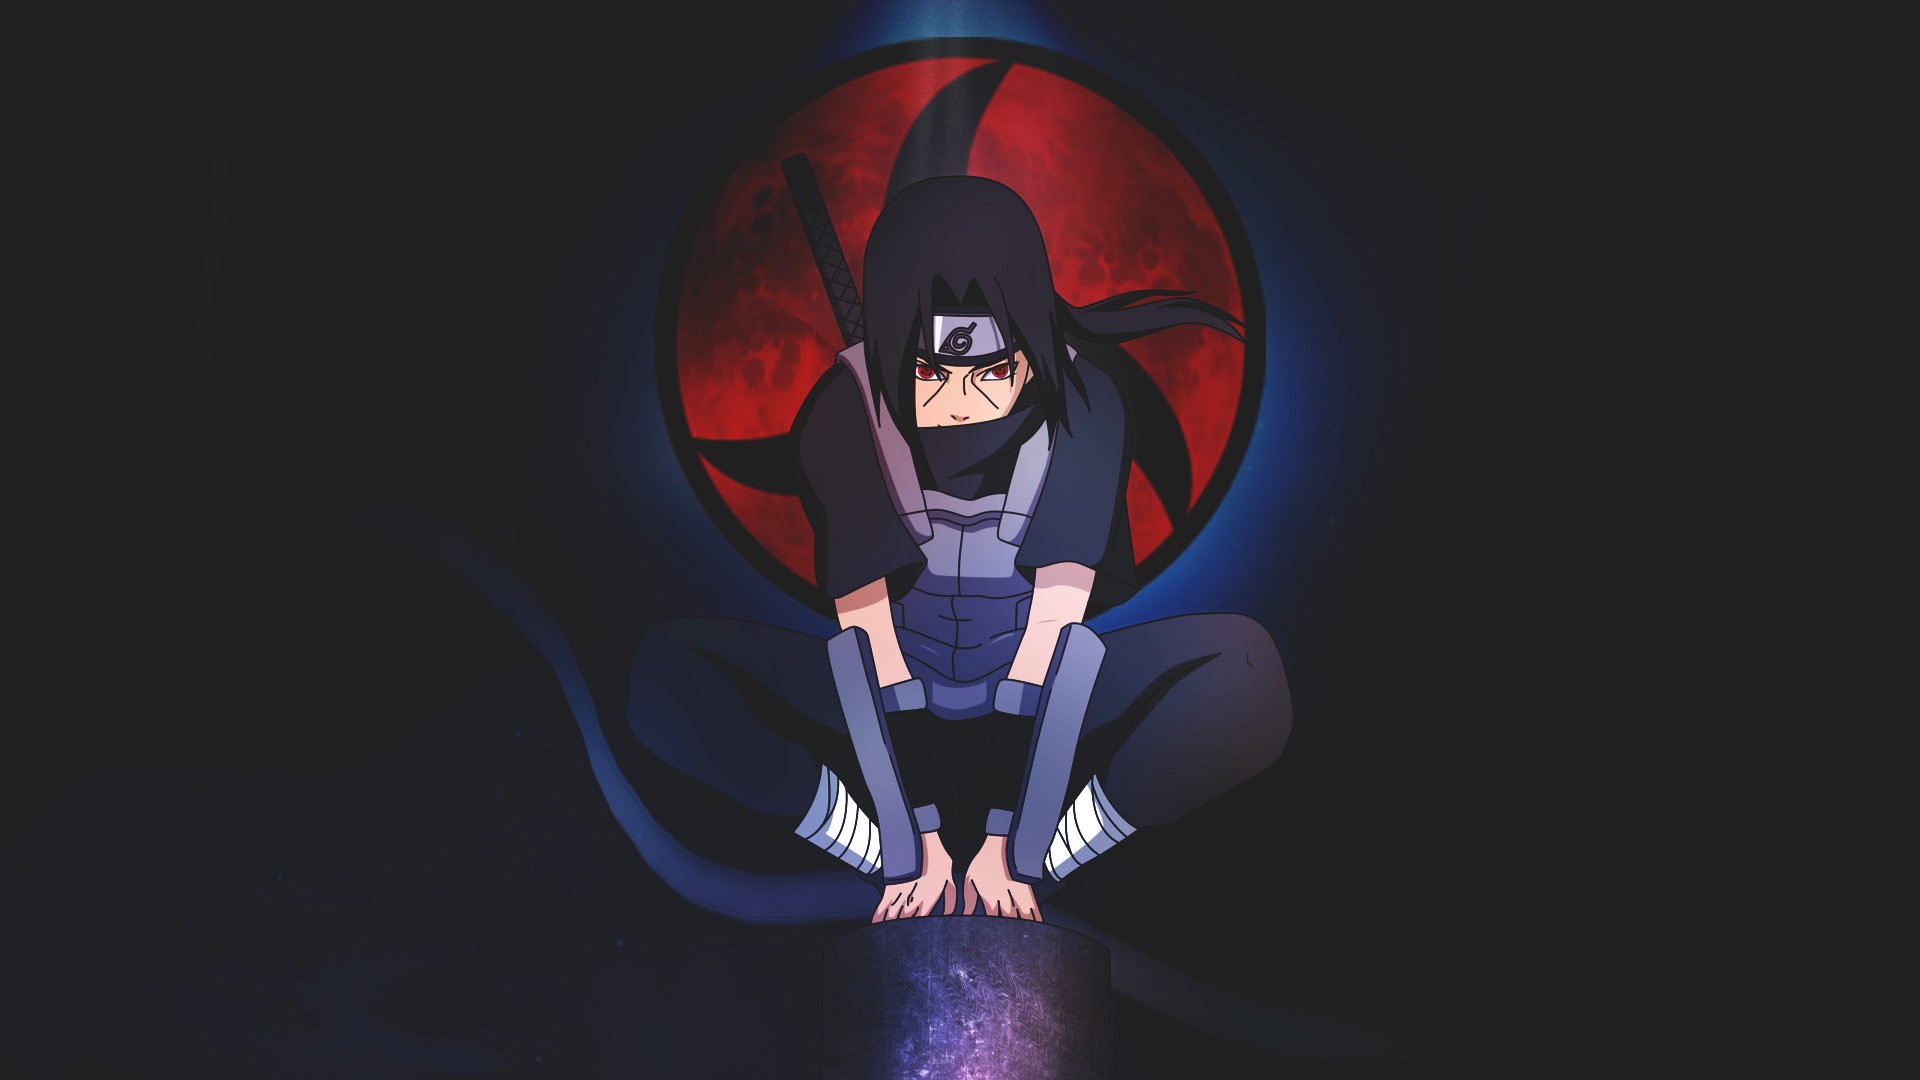 HD Wallpaper For Theme Naruto Background